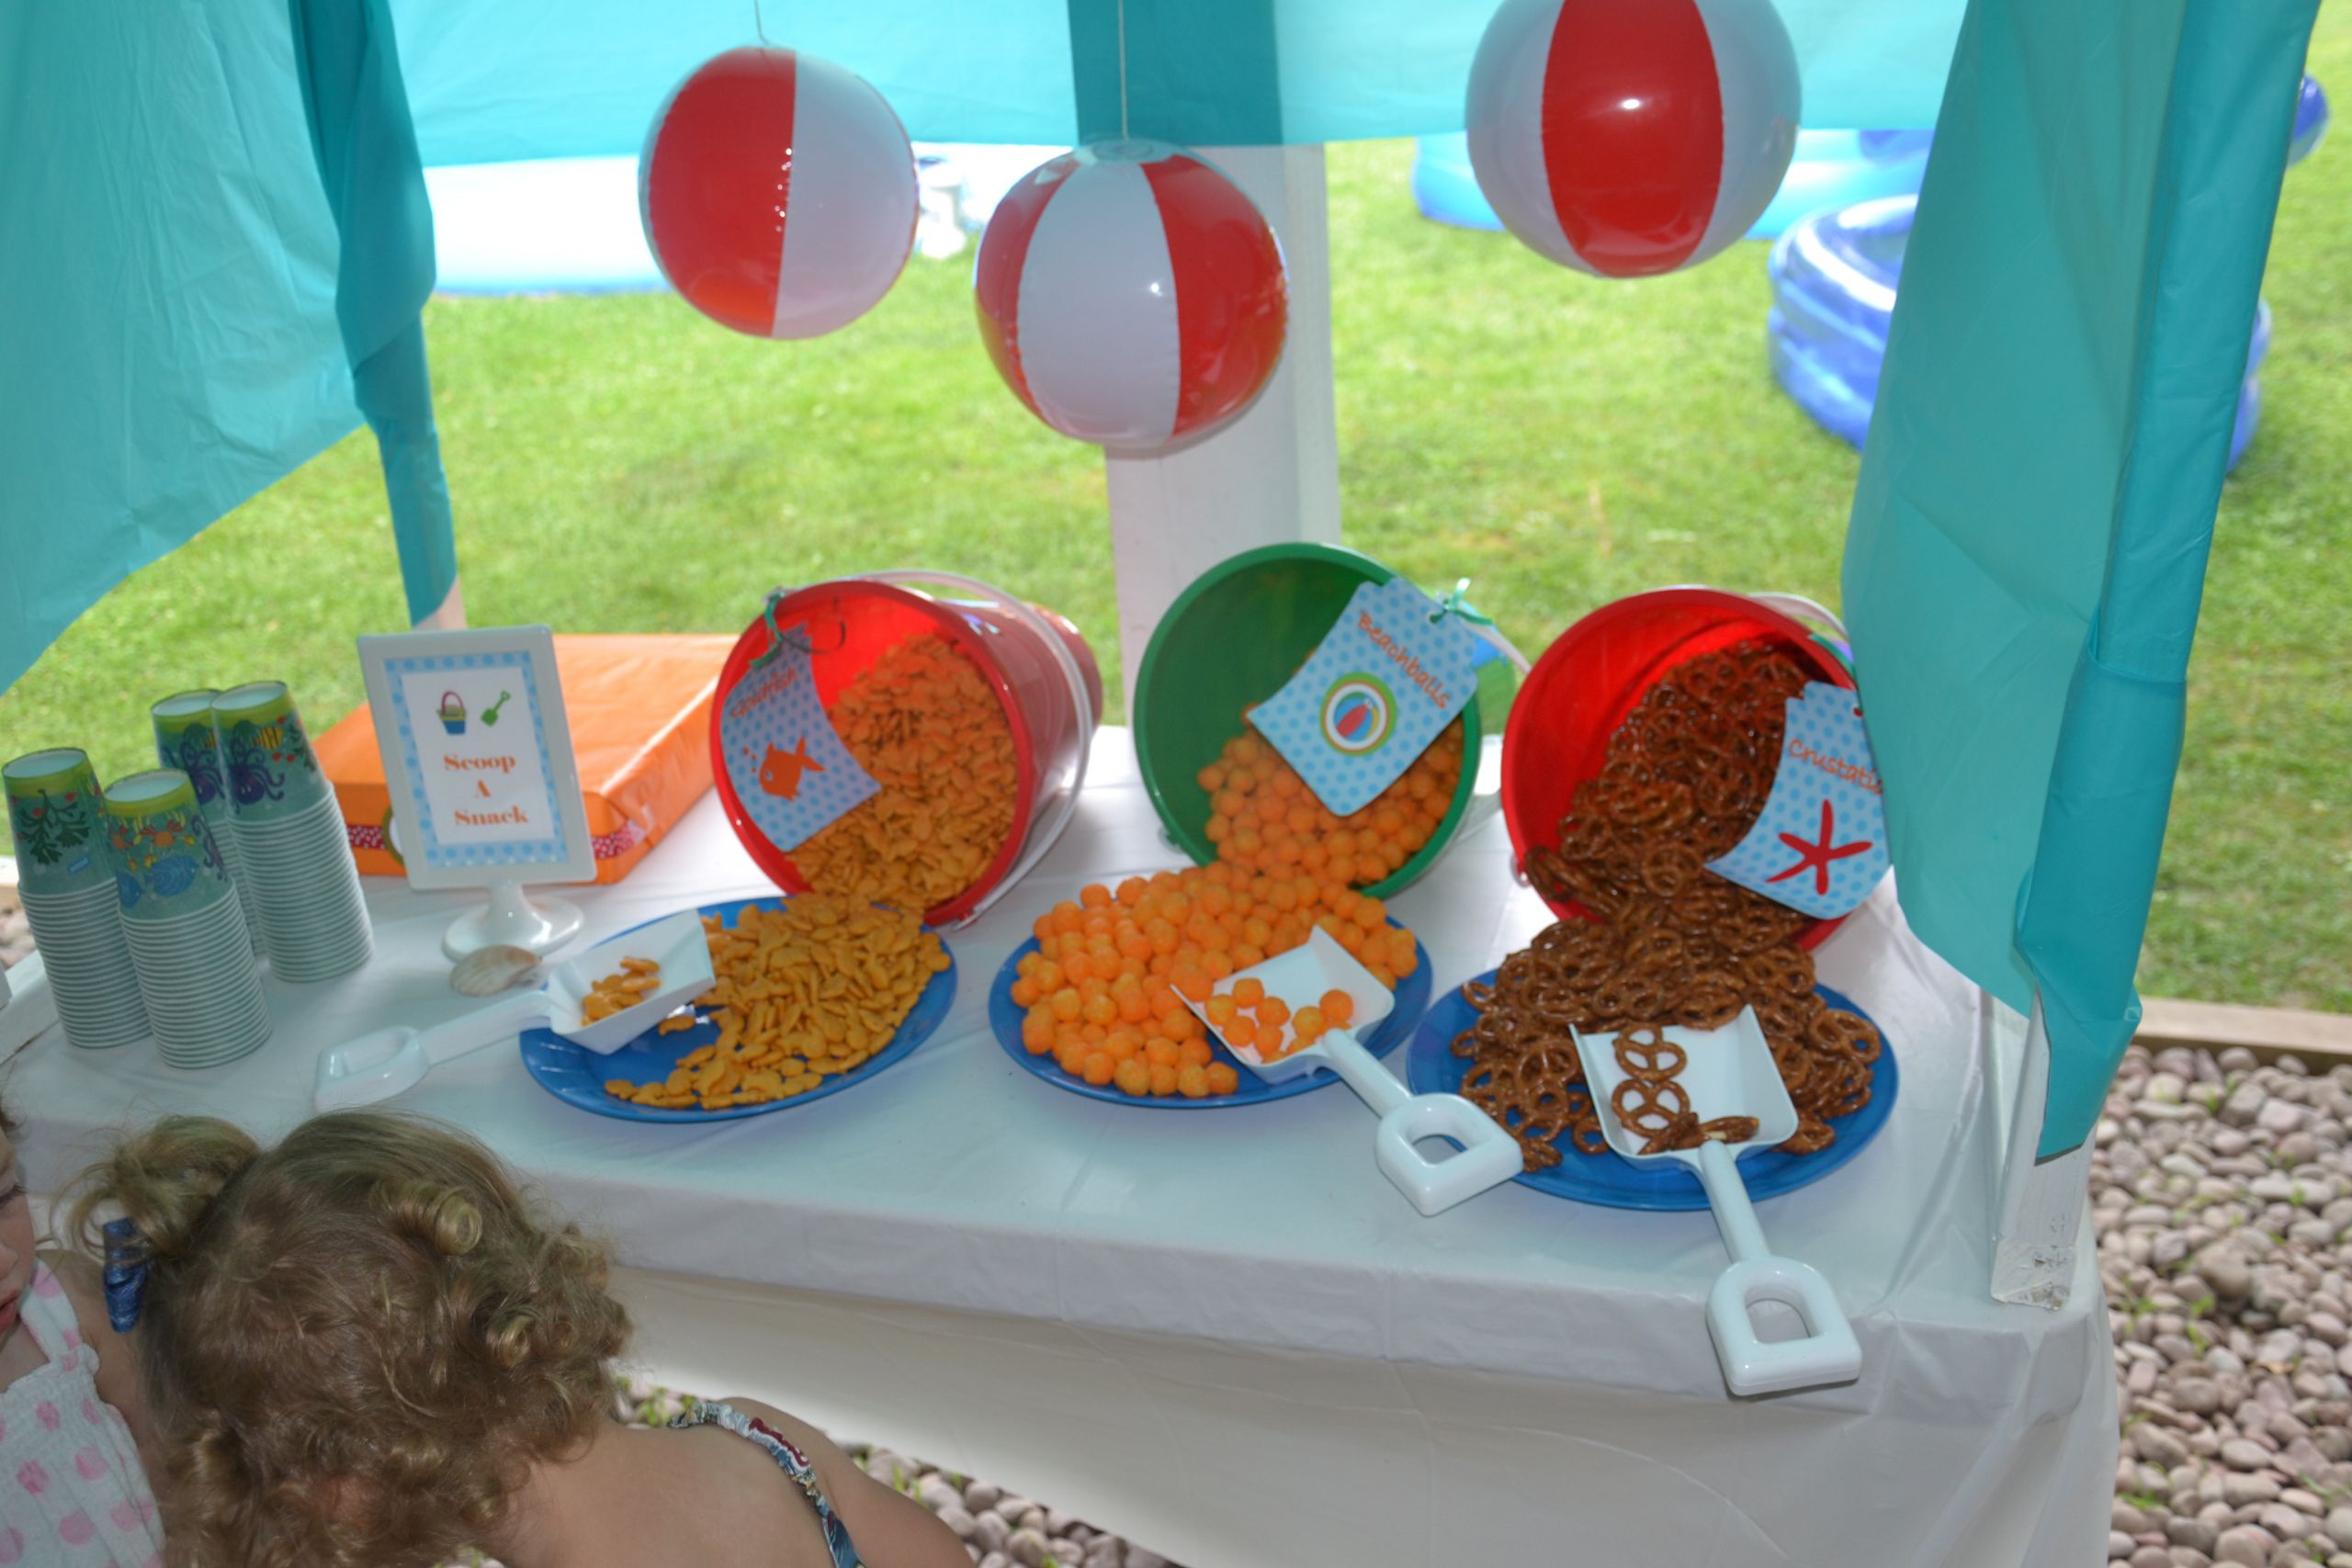 Kid Beach Party Food Ideas
 Party on a Bud  Ideas for Serving Summer Snacks